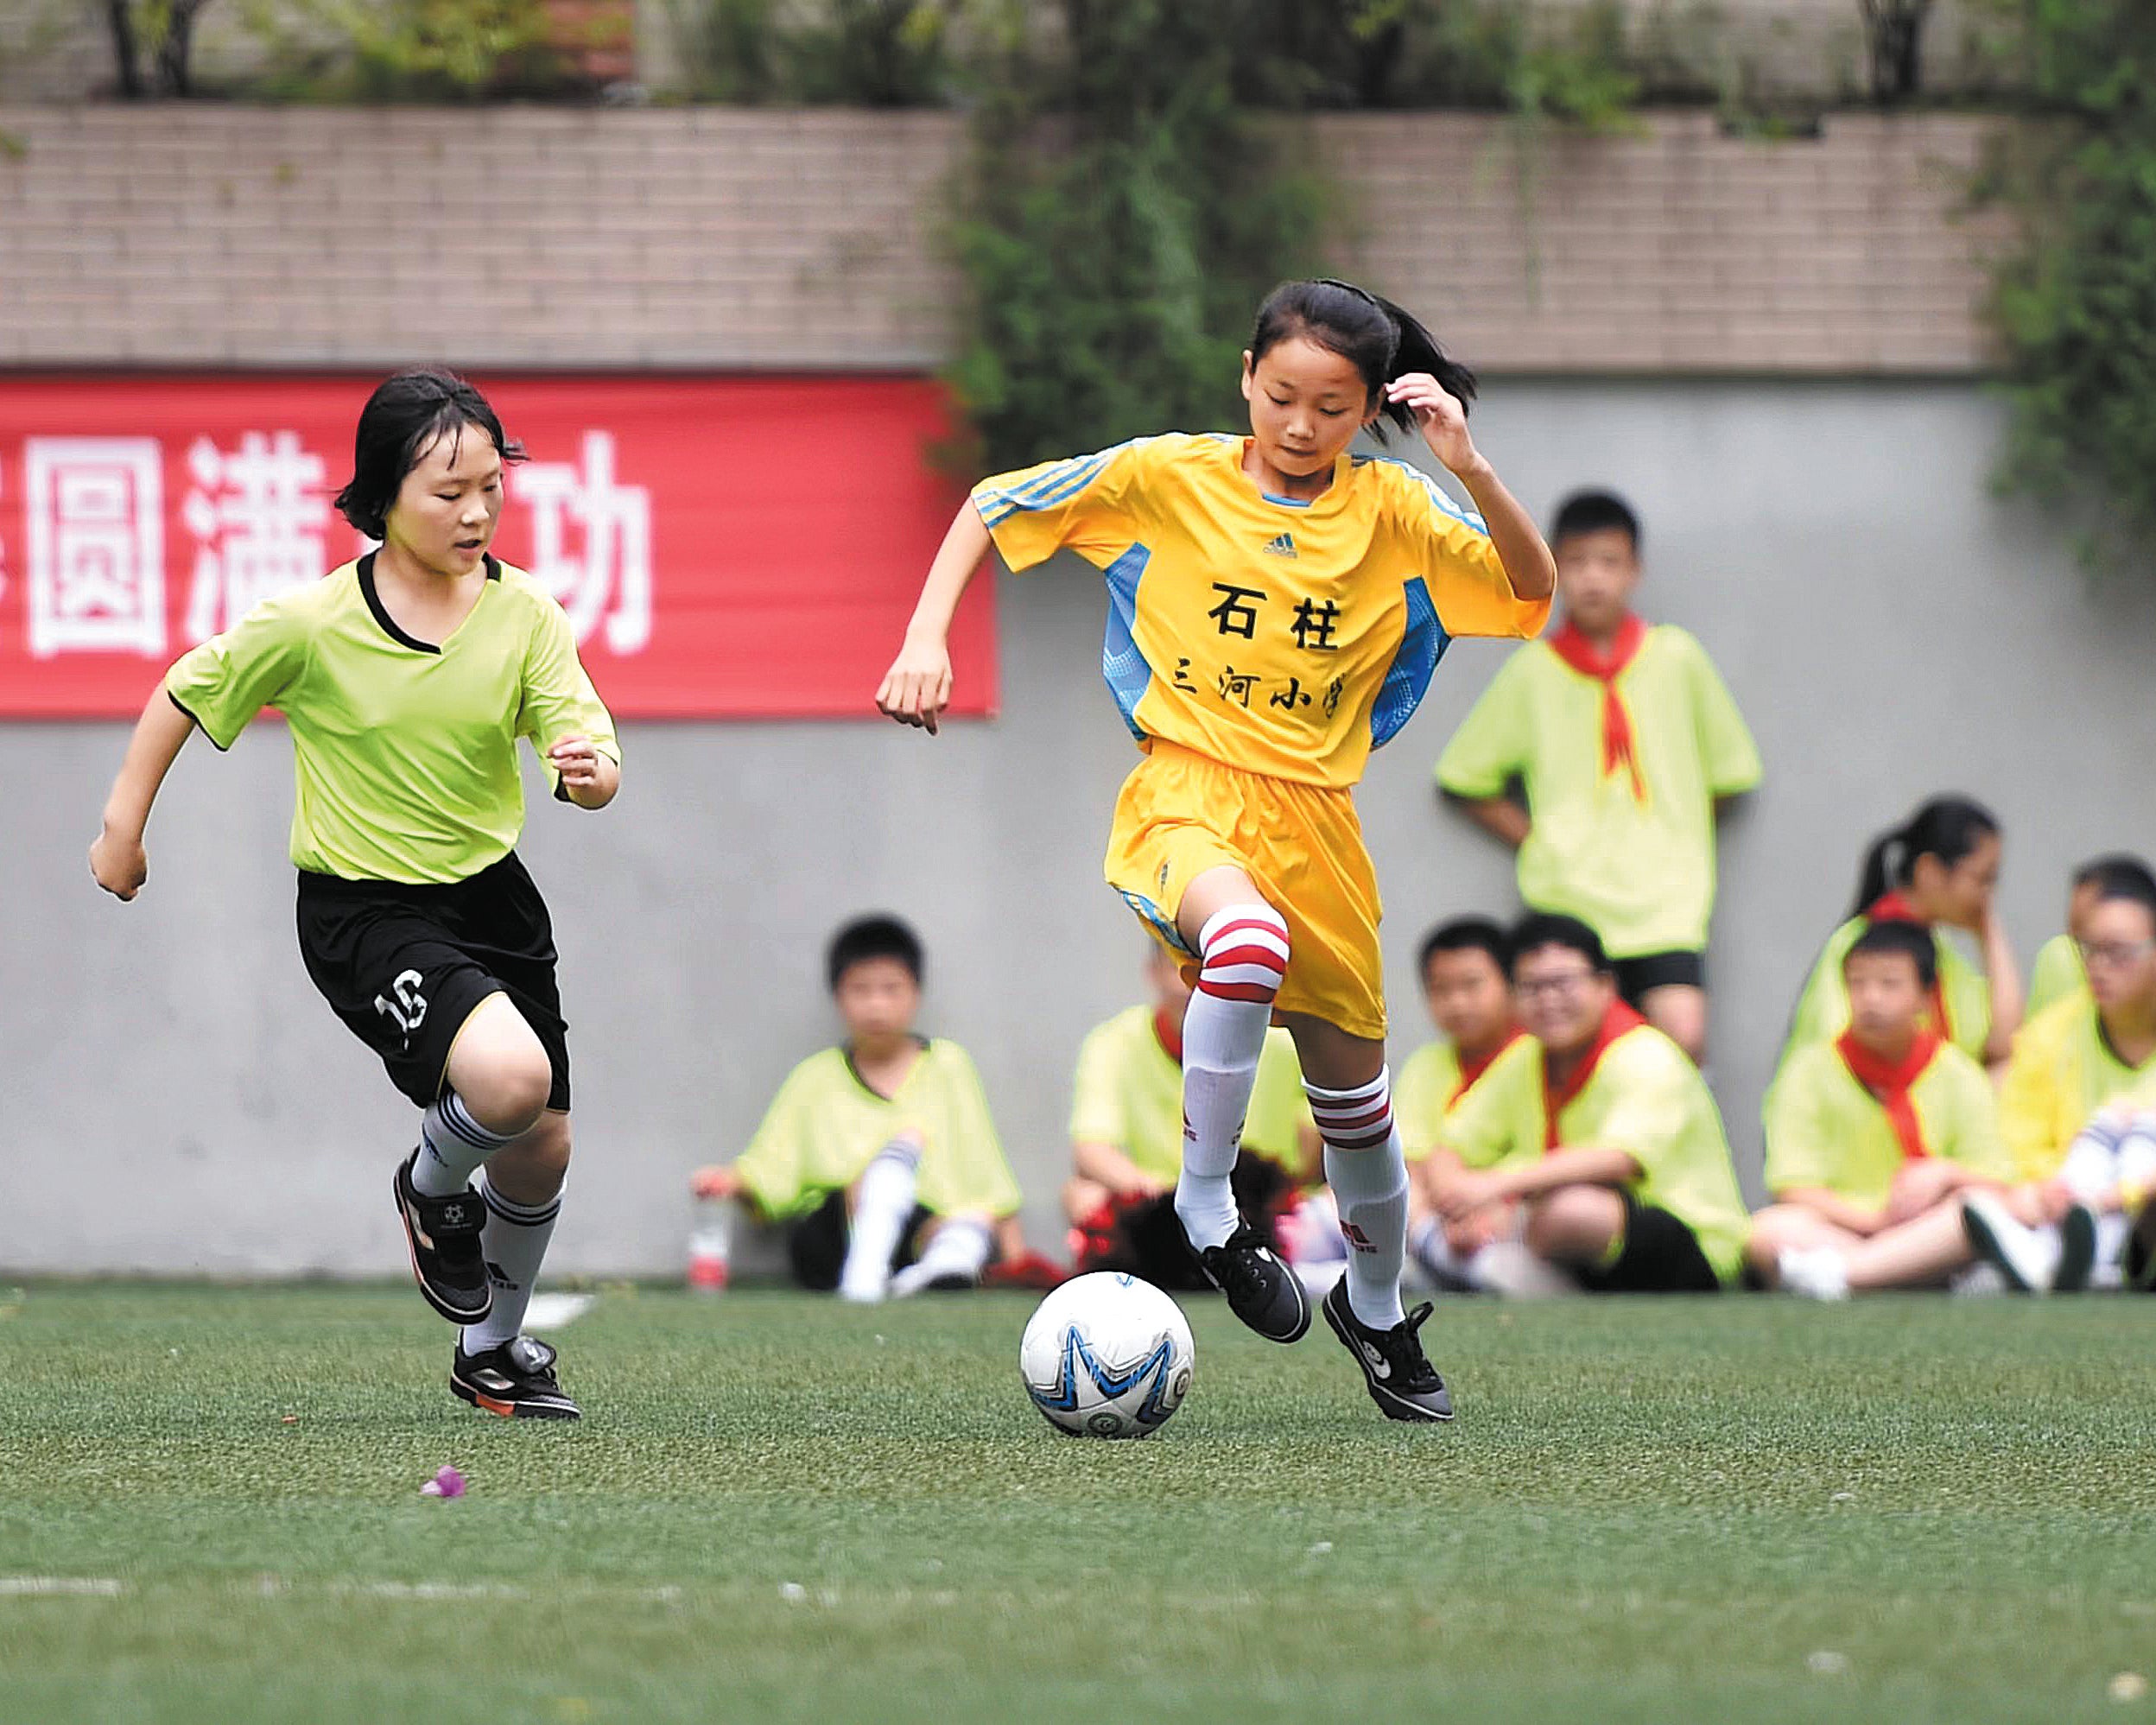 Members of Sanhe Primary School’s girls’ football team in Chongqing’s Shizhu Tujia autonomous county play in an exhibition game